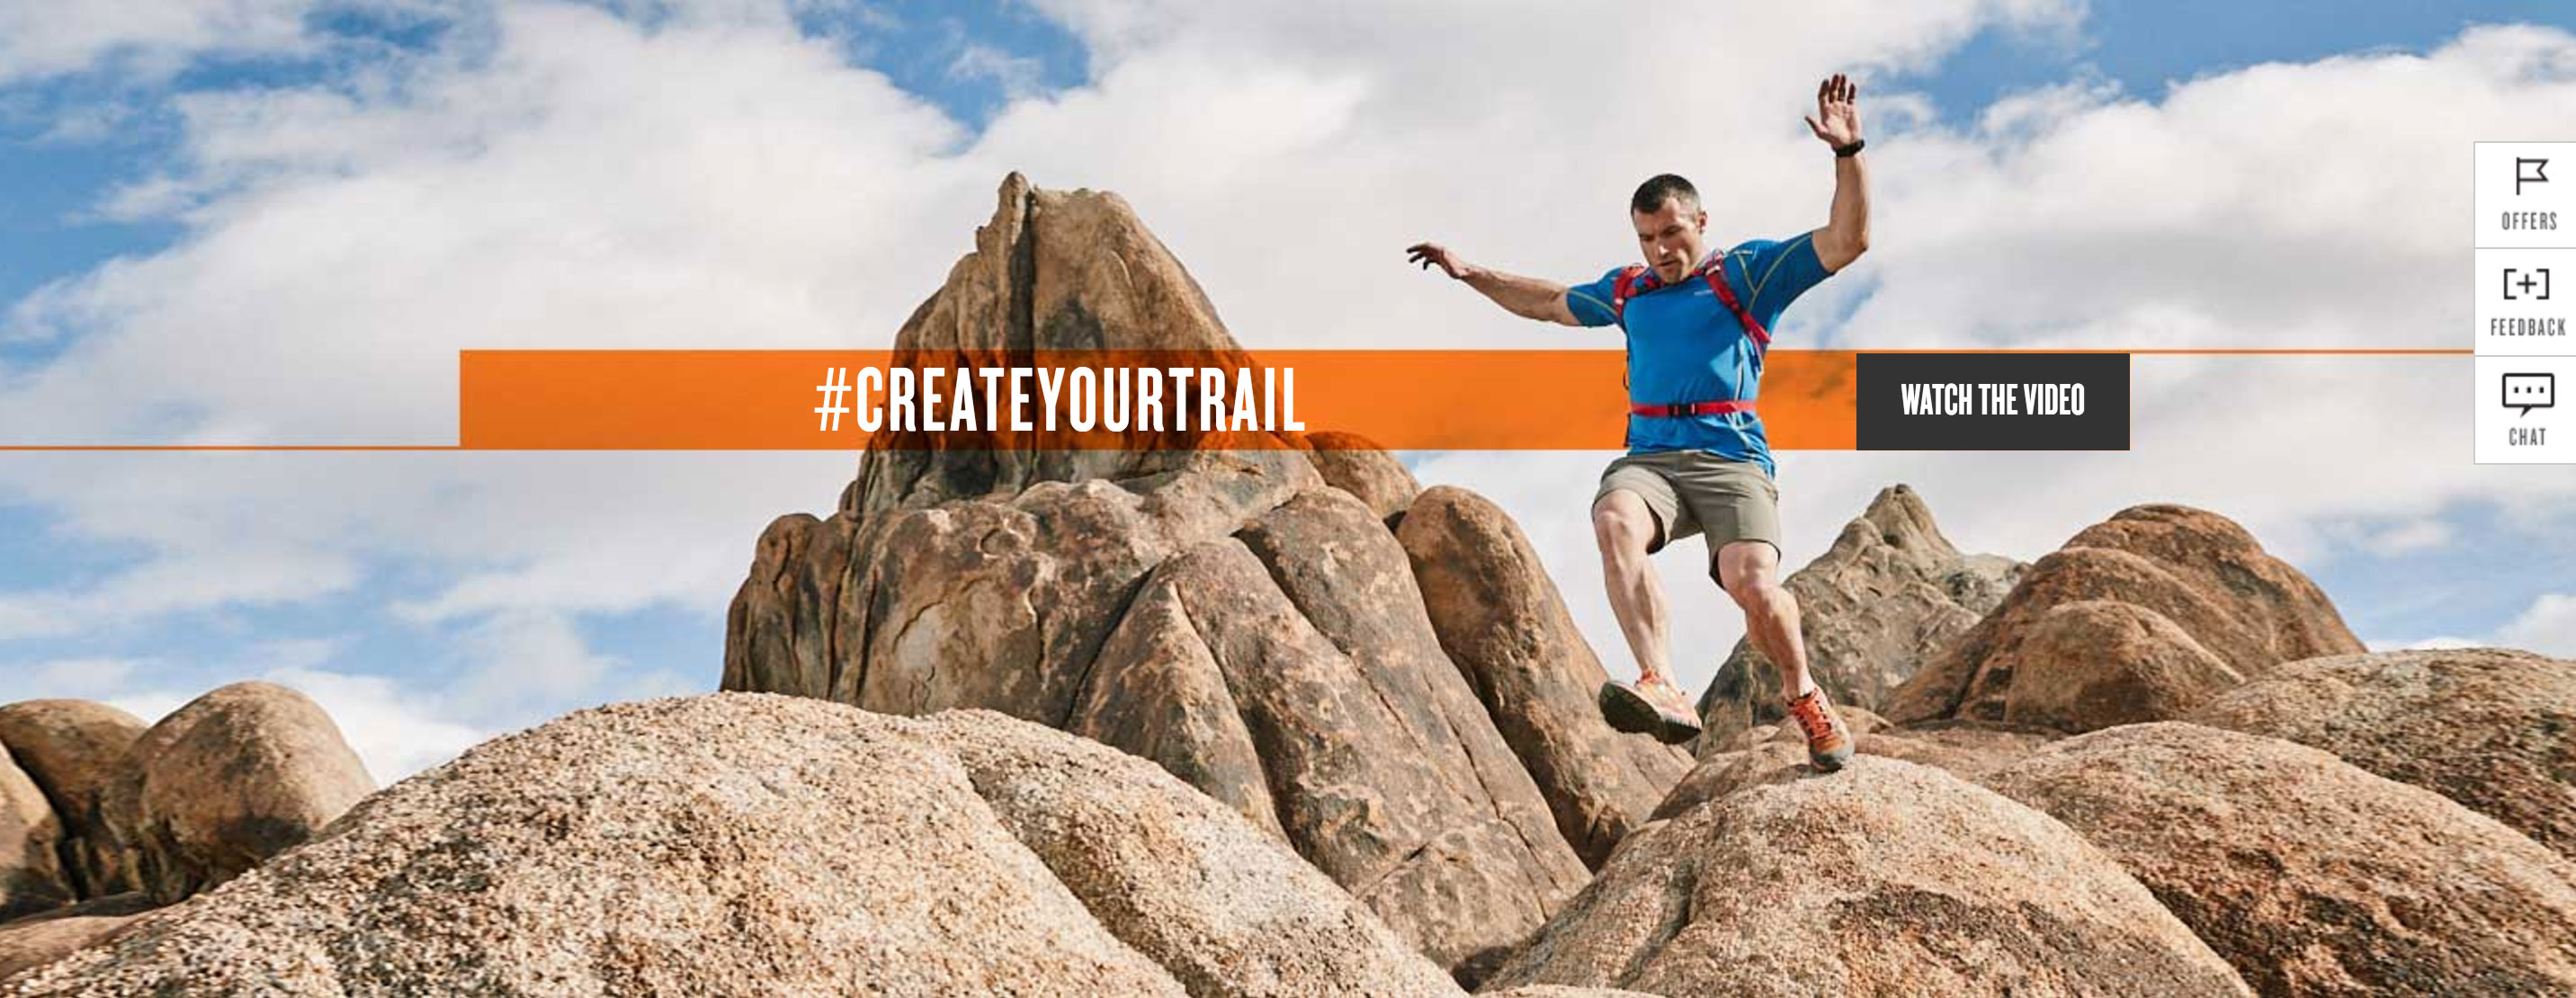 Merrell #createyourtrail Campaign shot by Andrew Maguire